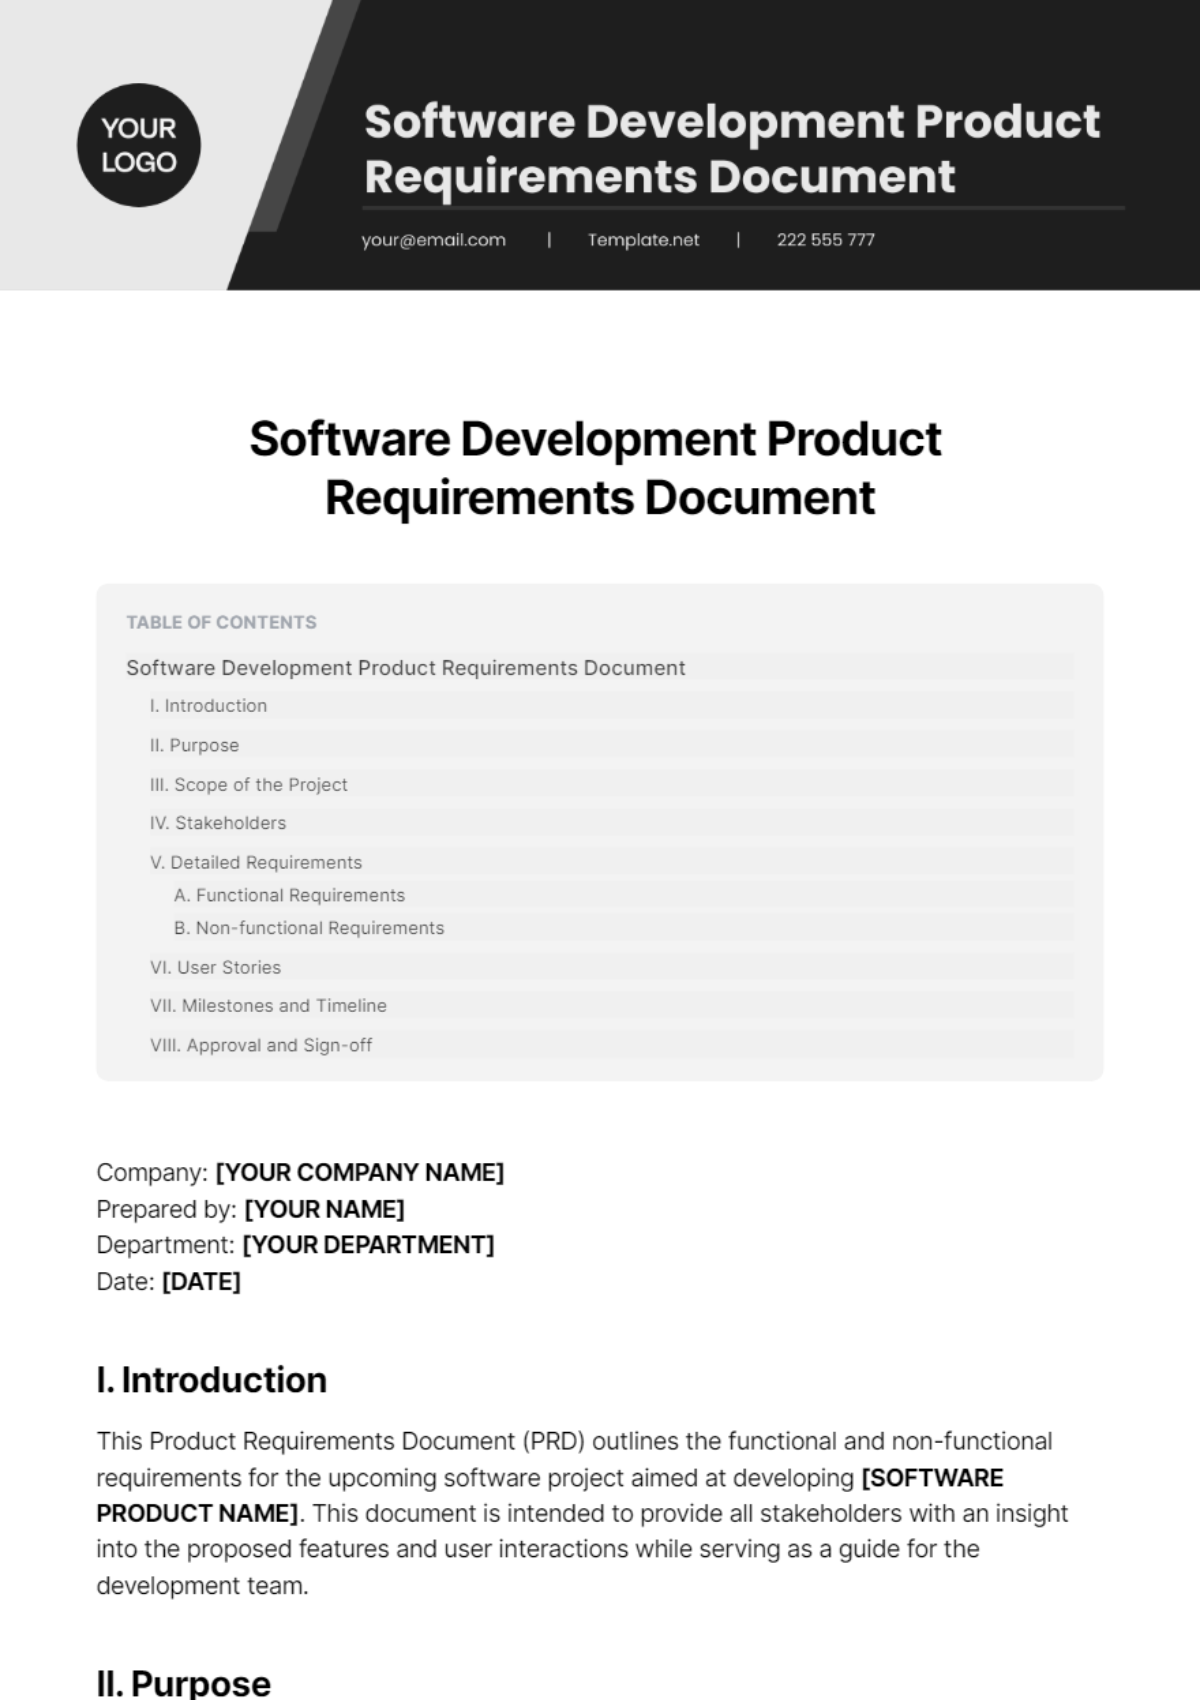 Software Development Product Requirements Document Template